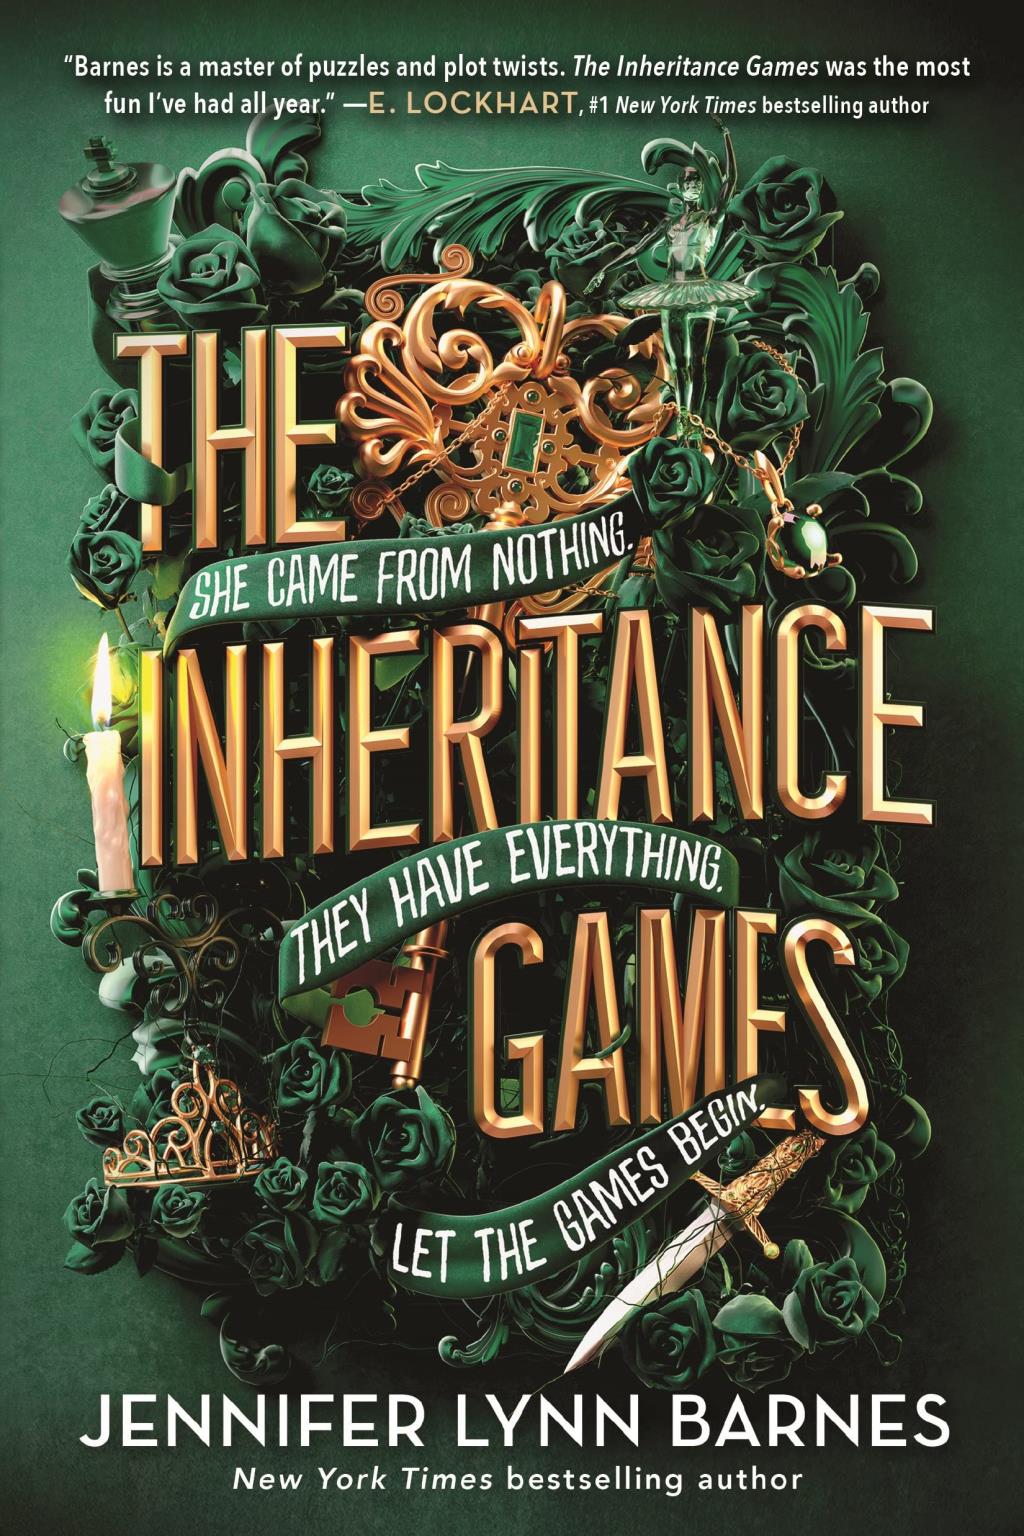 inheritance games book cover